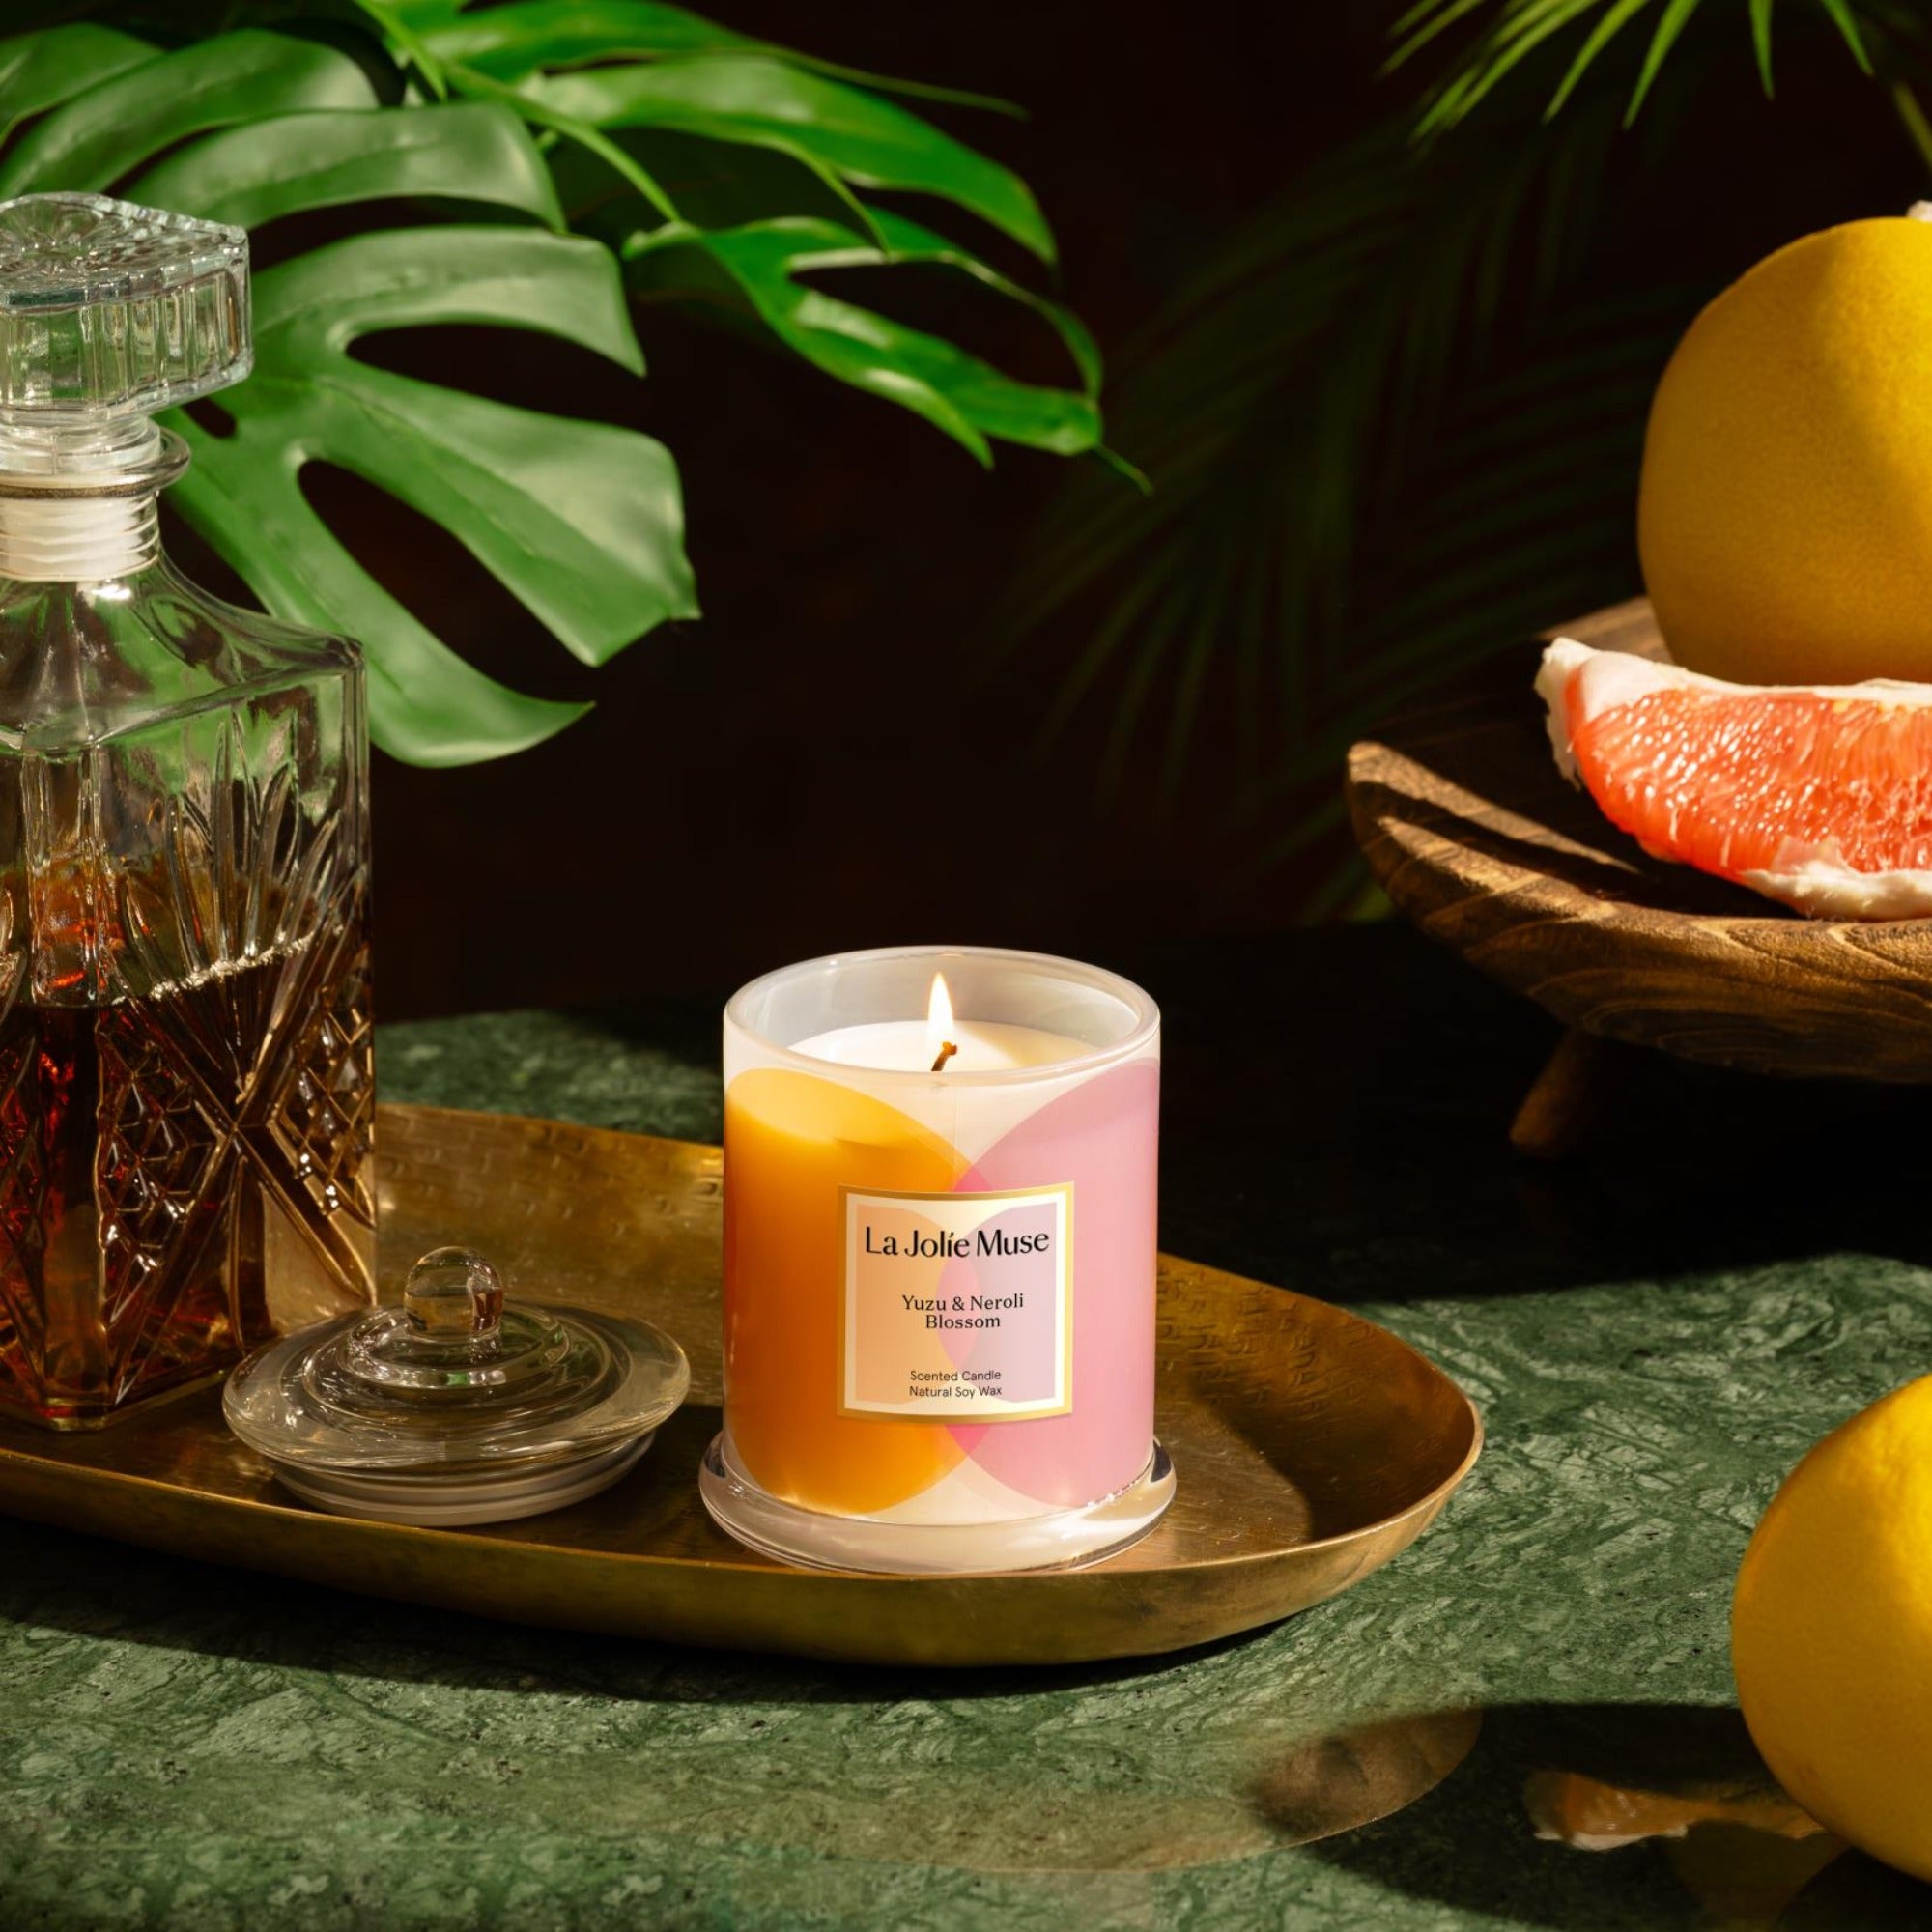 Photo shot of a lit Roesia - Zest Yuzu & Neroli Blossom 10oz candle placed on a wooden tray, with a bottle of wine on the left and yuzu on the right